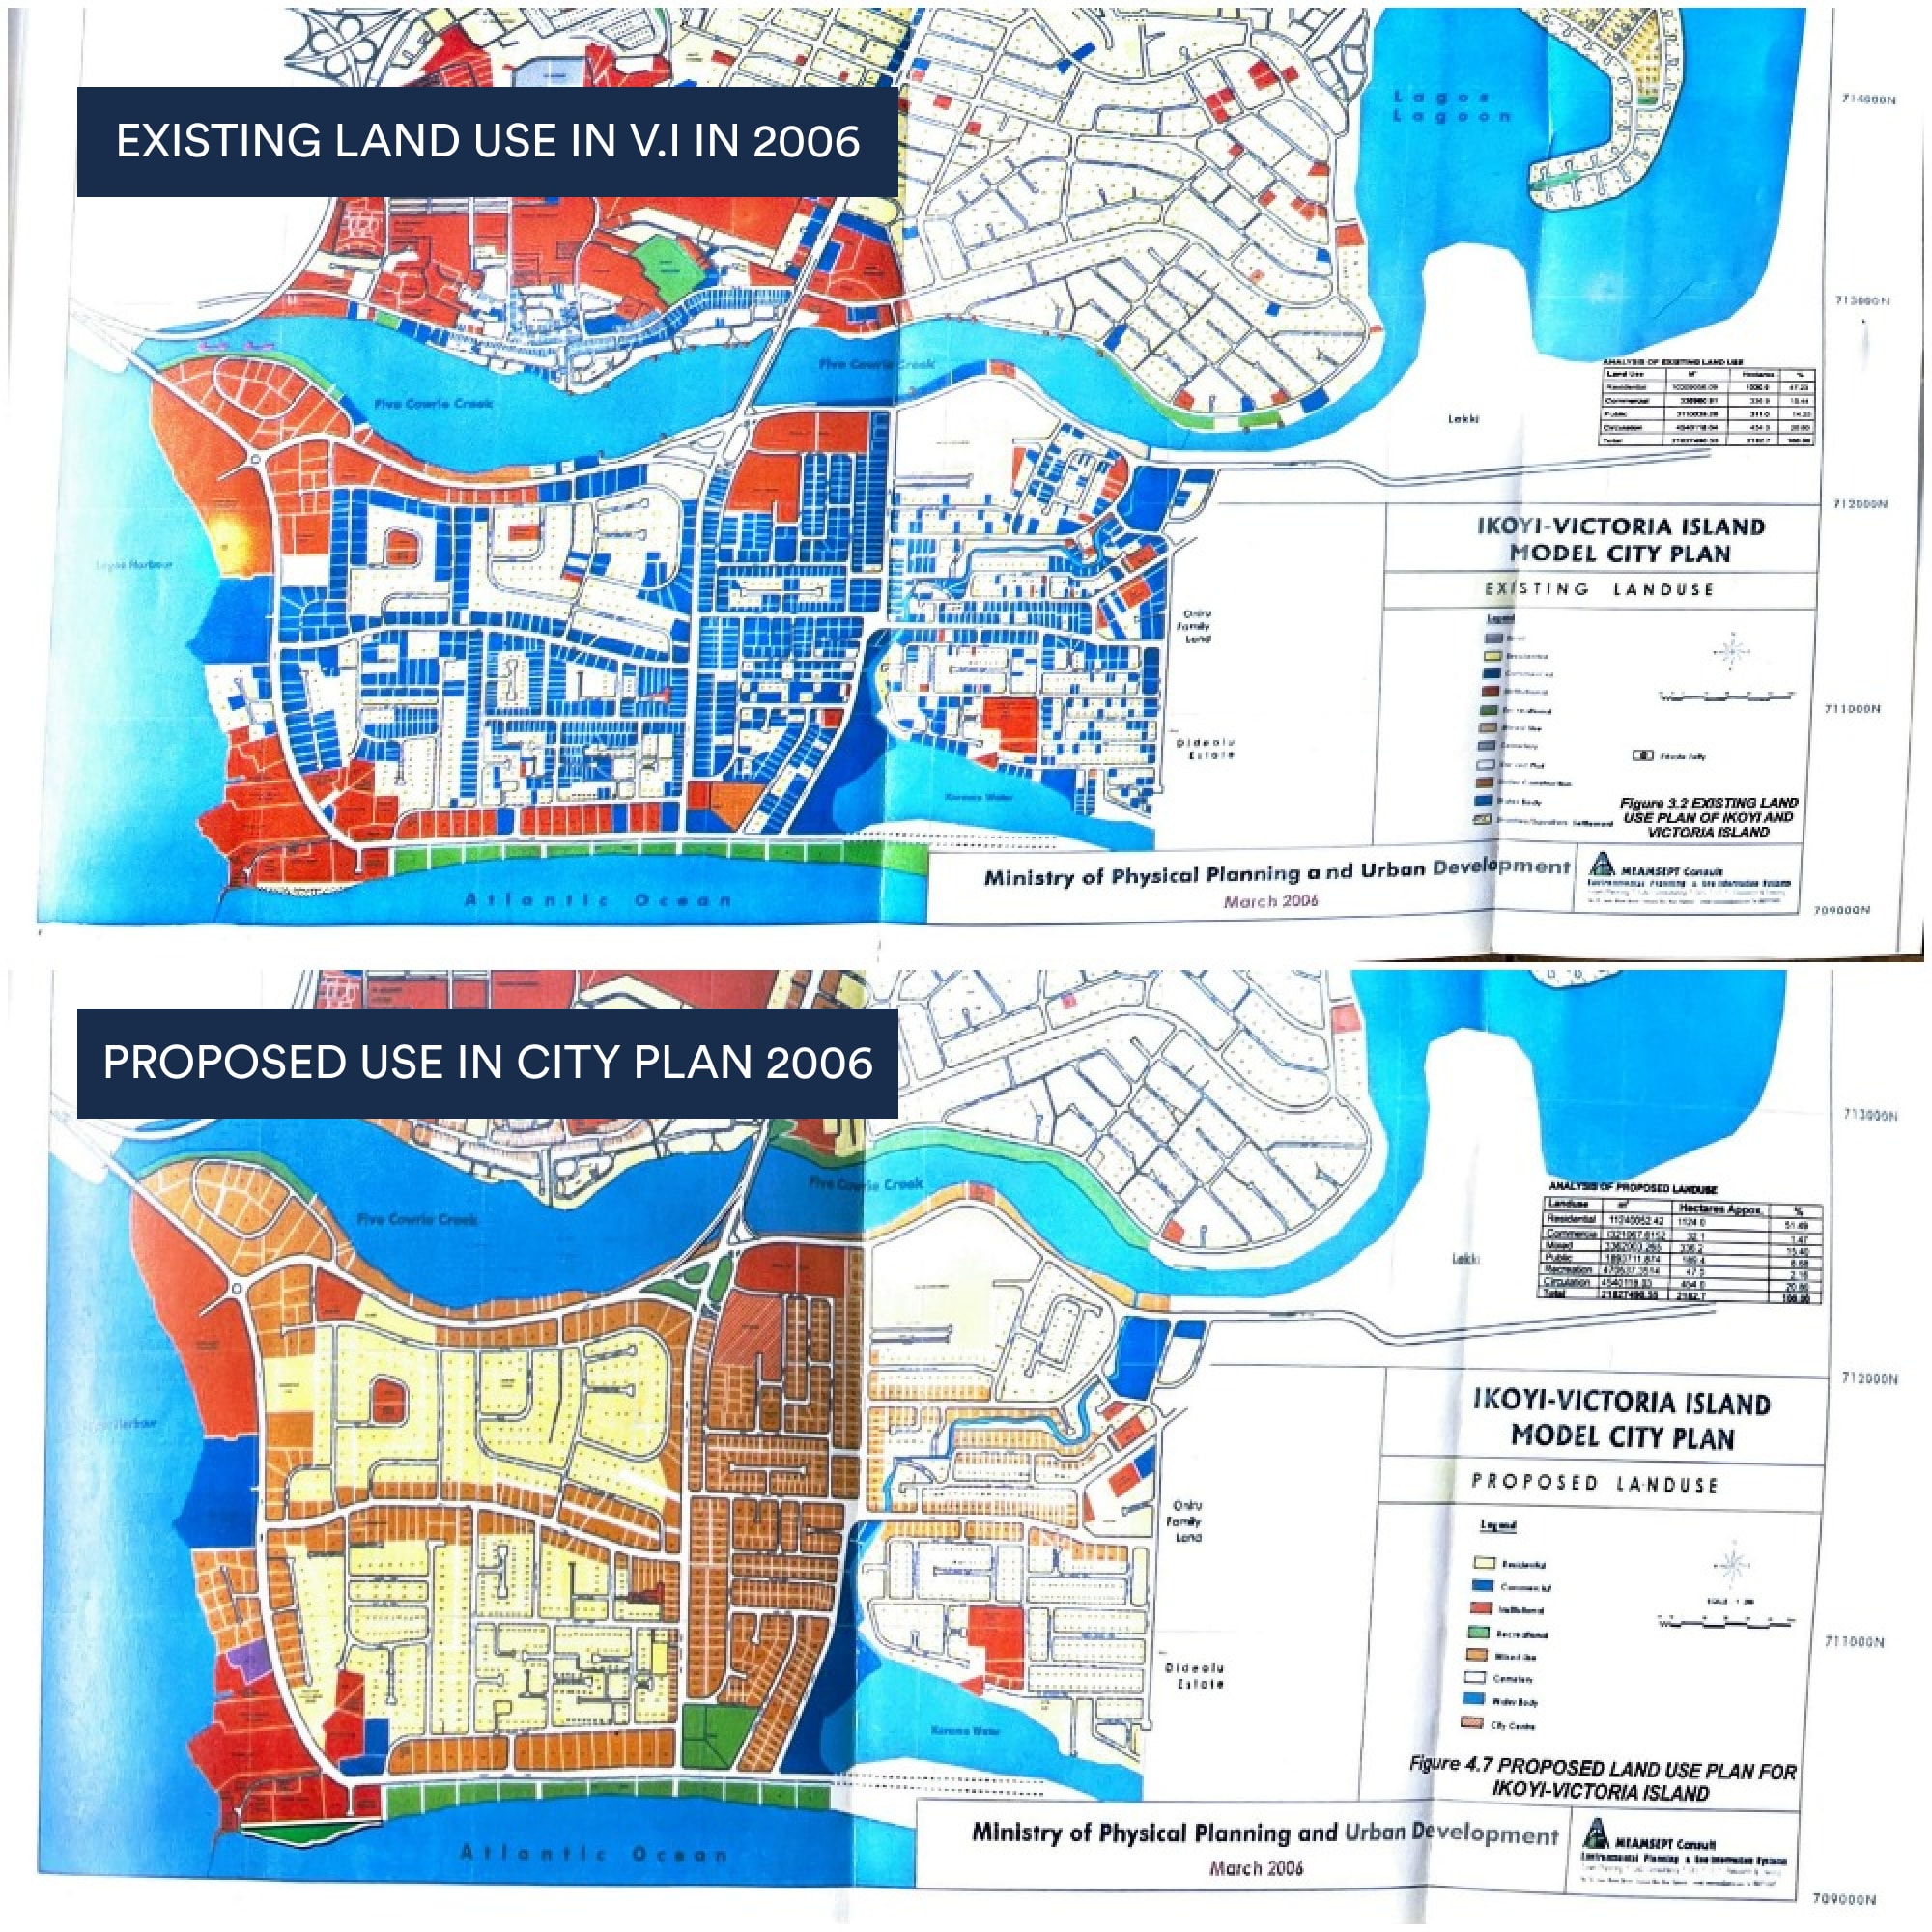 Existing use of land and the proposed use of land within the 2006 Ikoyi-Victoria Island Model City Master plan